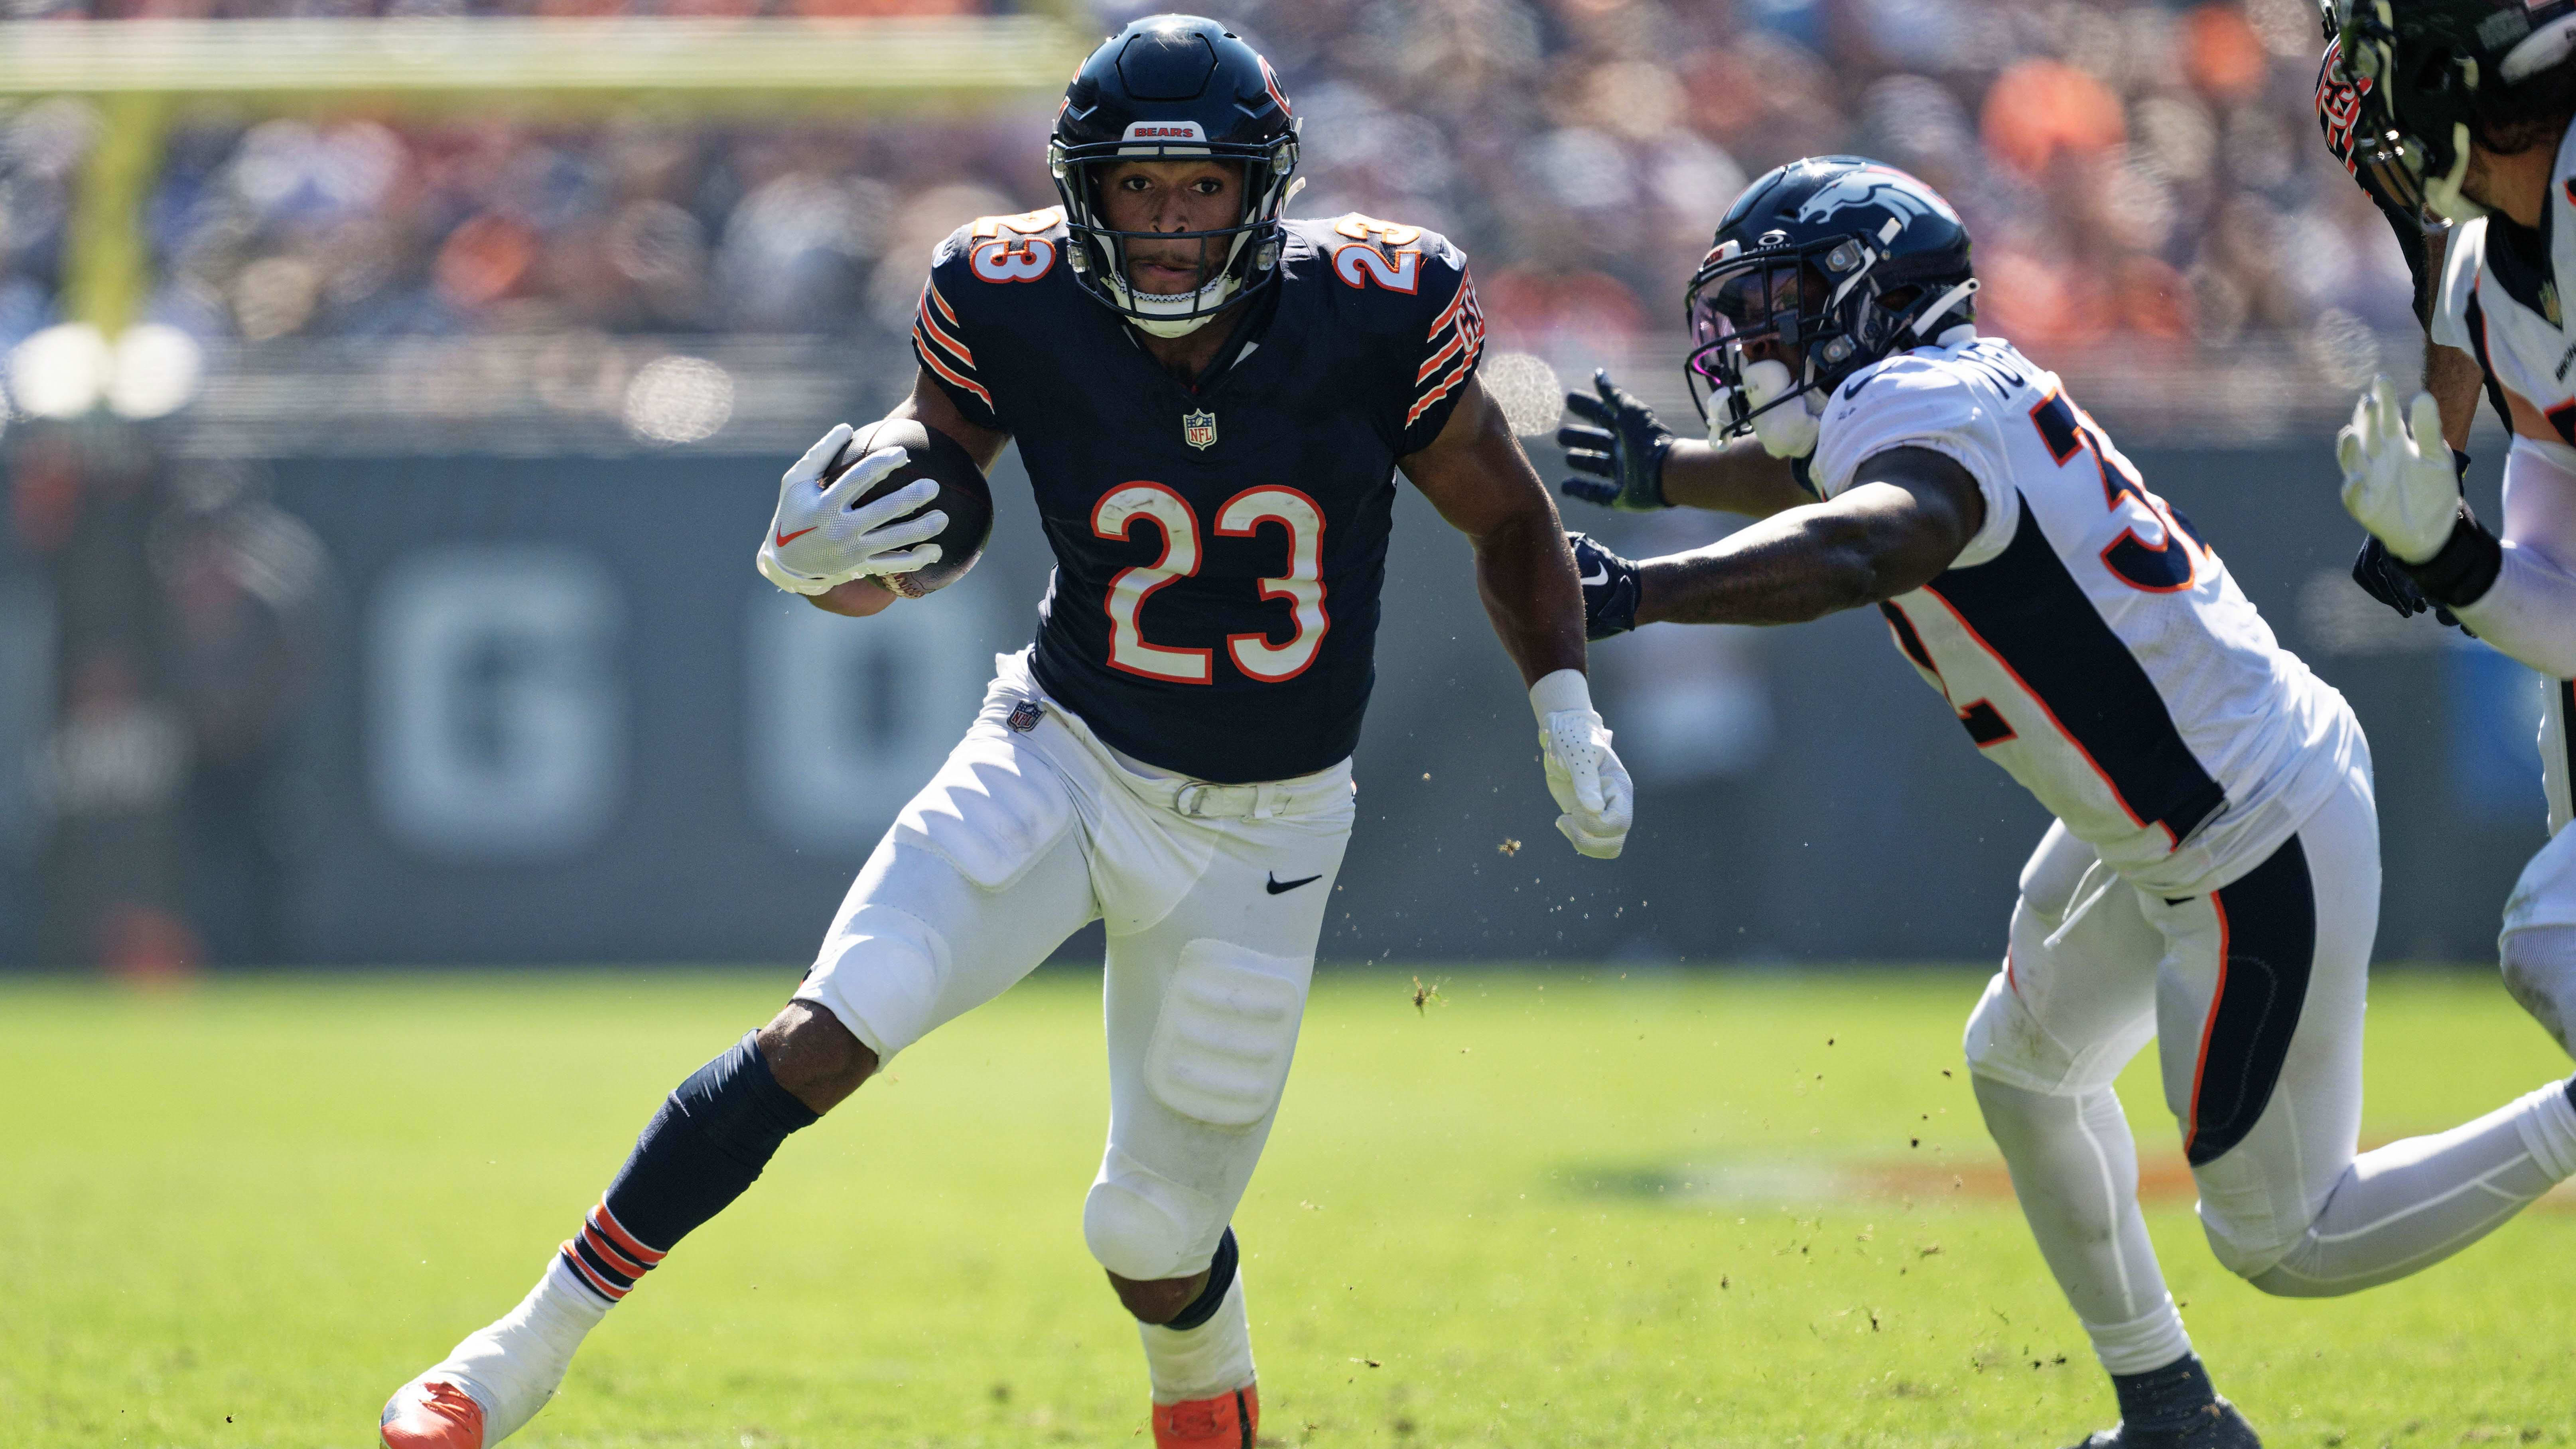 How Roschon Johnson, D'Andre Swift and Khalil Herbert are used might look different but the Bears should emphasize the run.